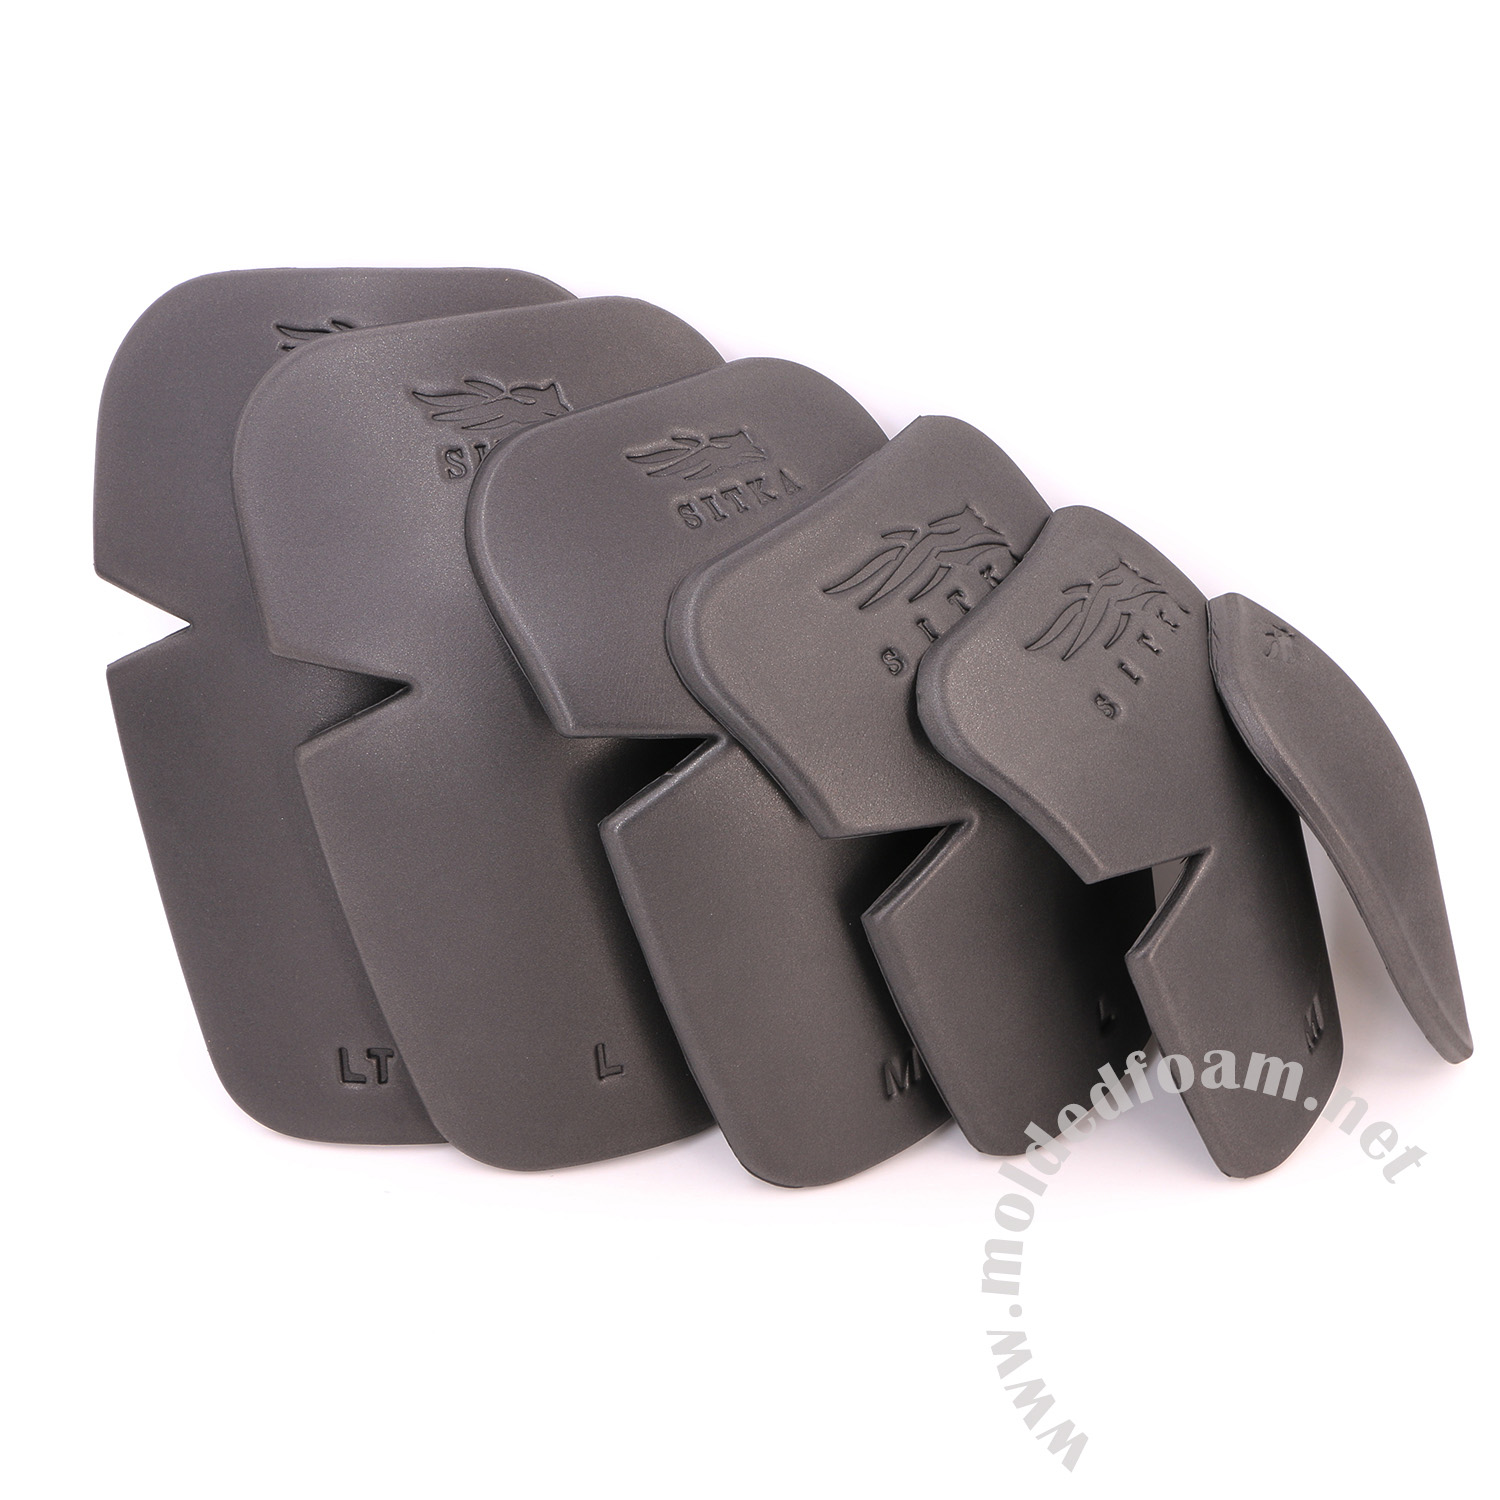 Custom molded rubber parts for sitka knee pad insert construction